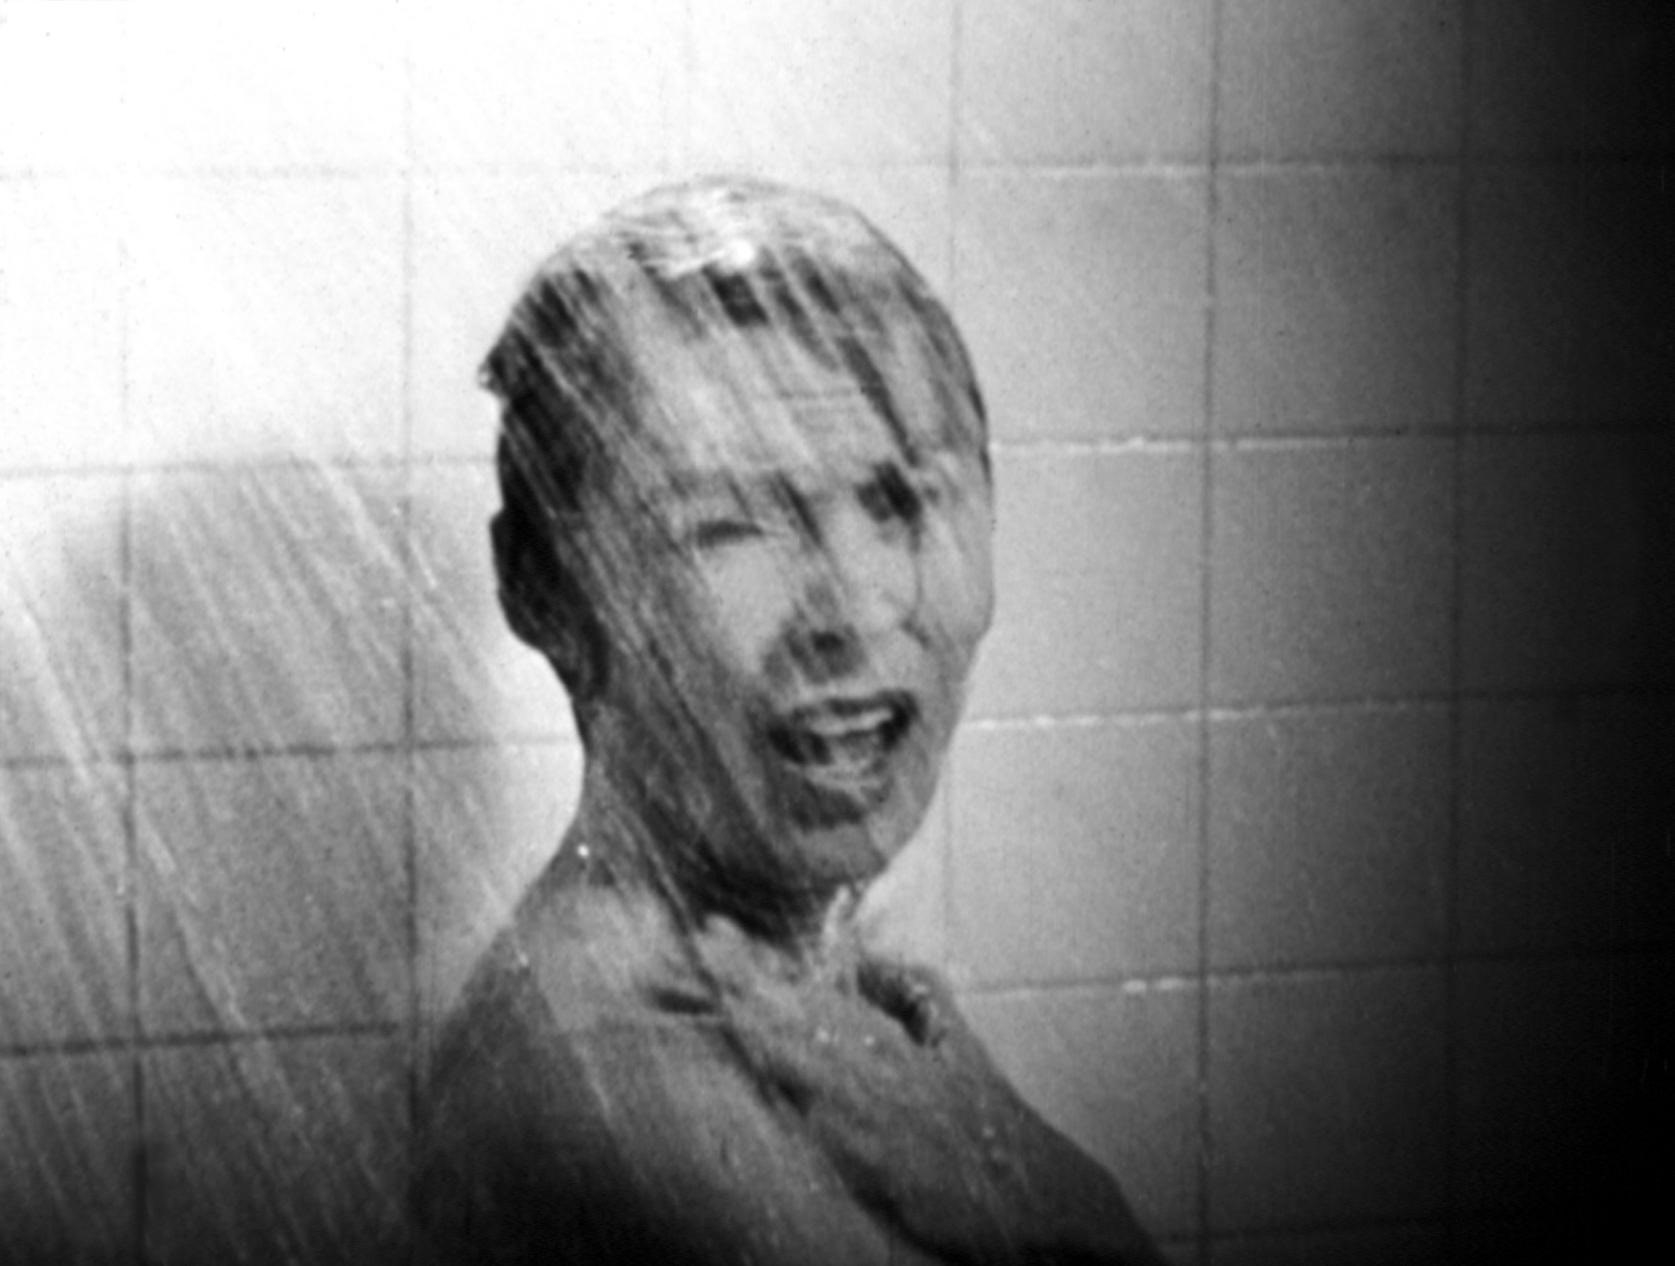 Janet Leigh stands in the shower